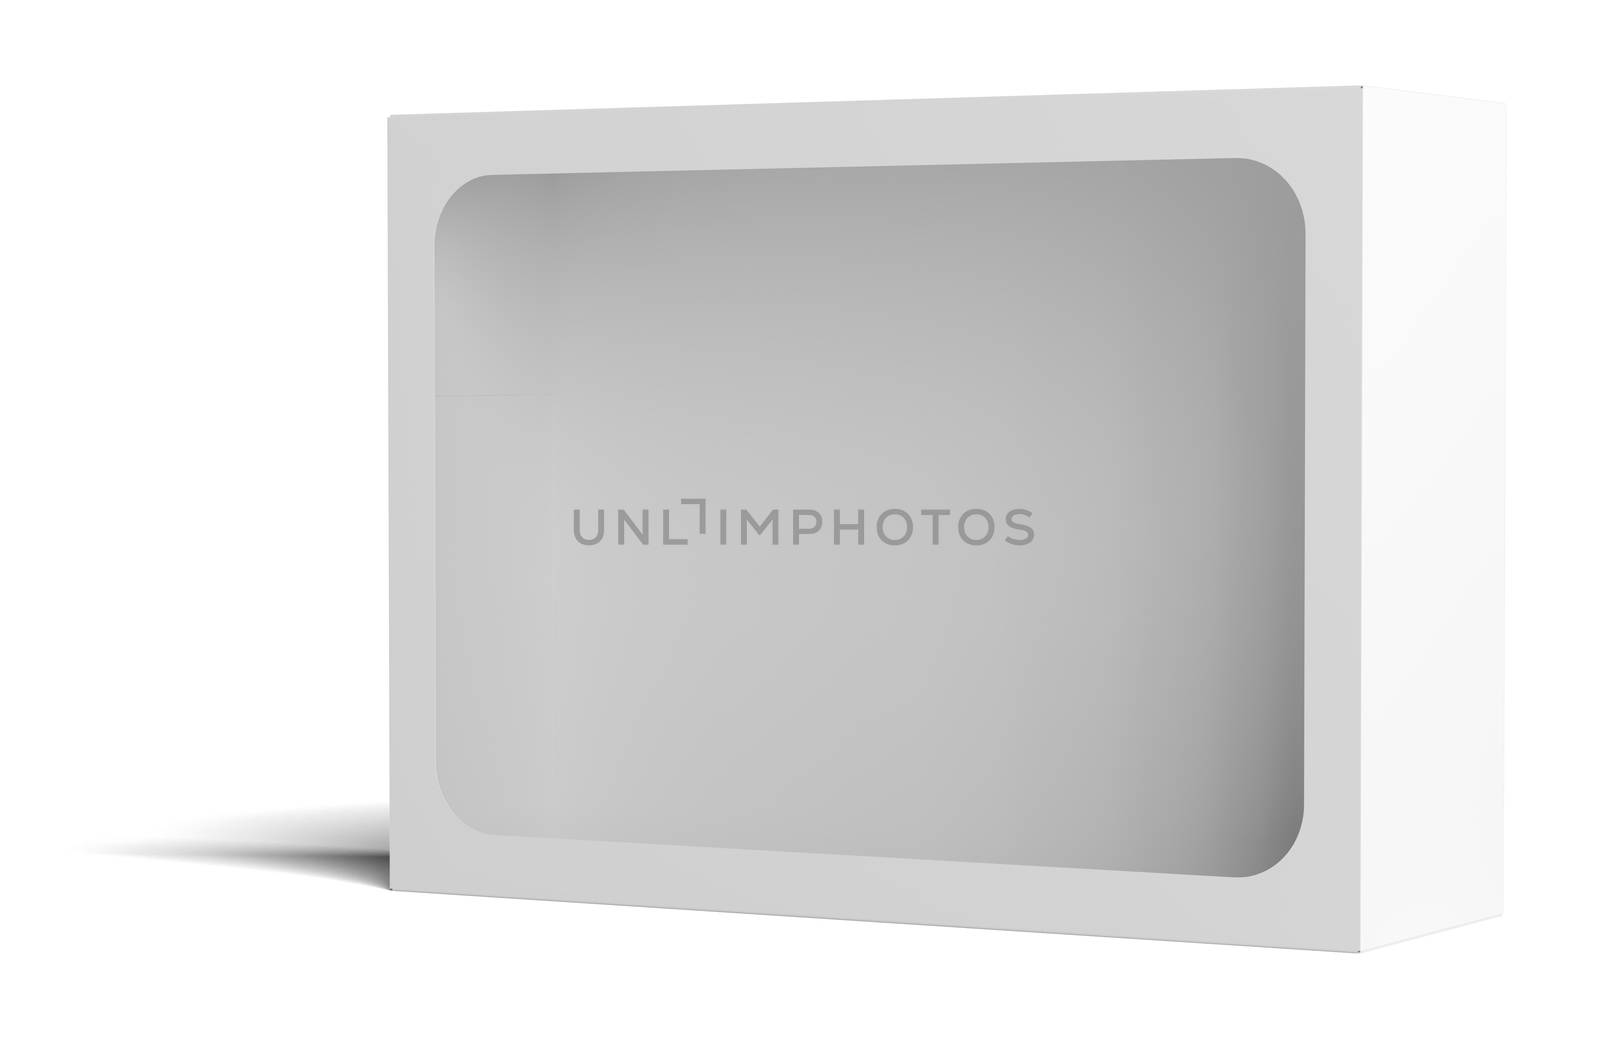 White empty packing cardboard box with a cutout in the middle. Isolated on white background. 3D illustration